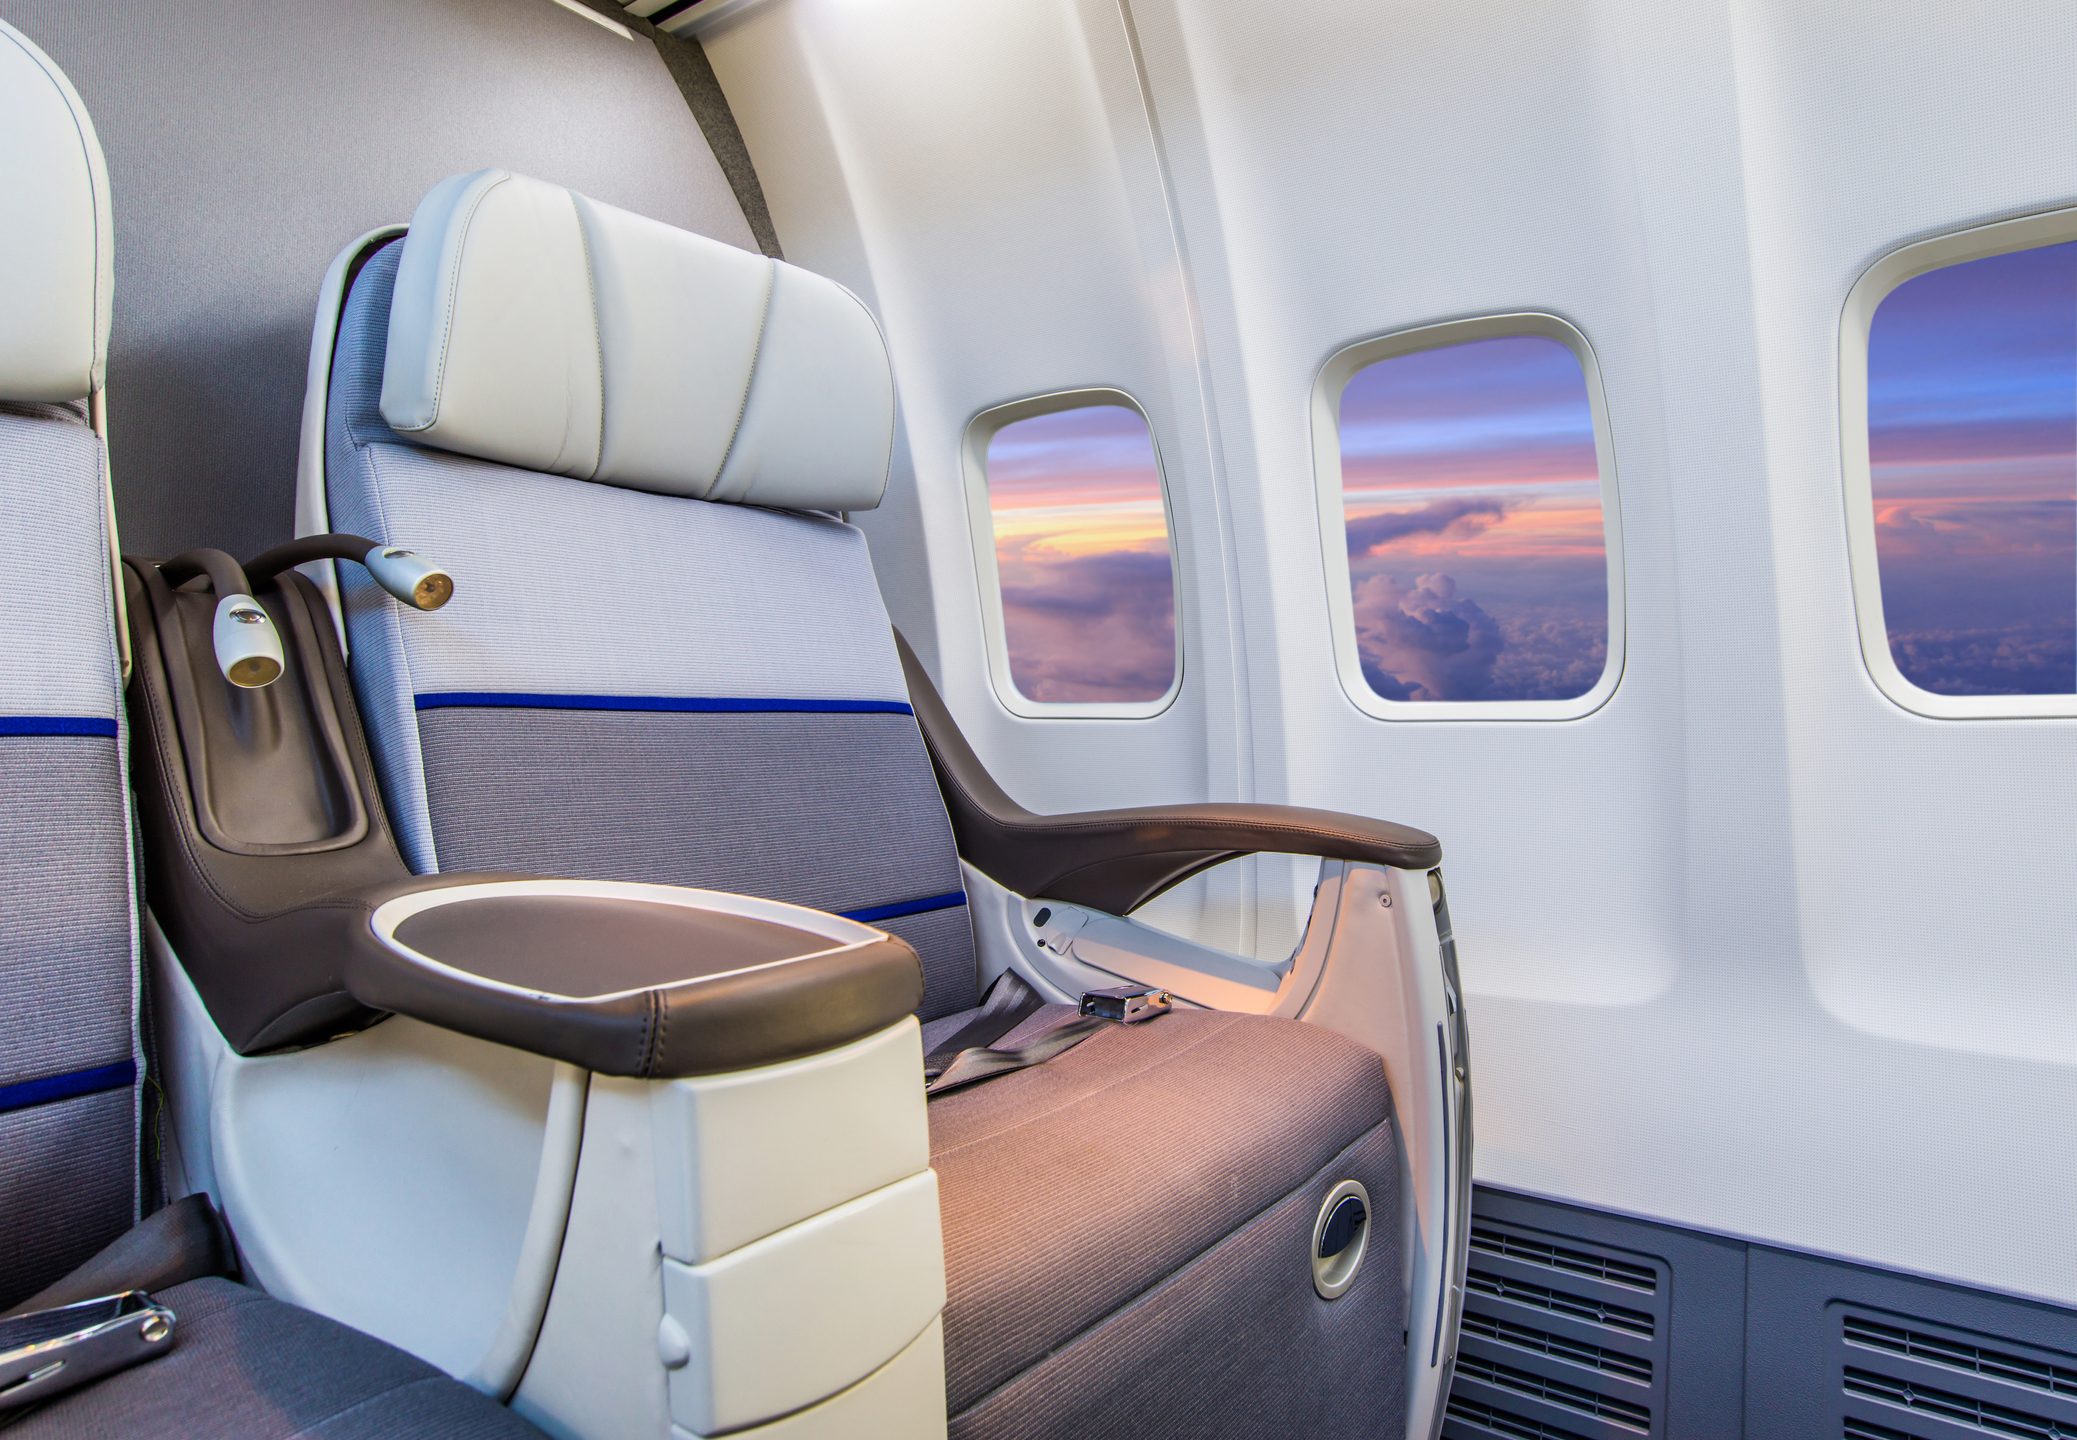 The plane seat you can NEVER book even if it's empty